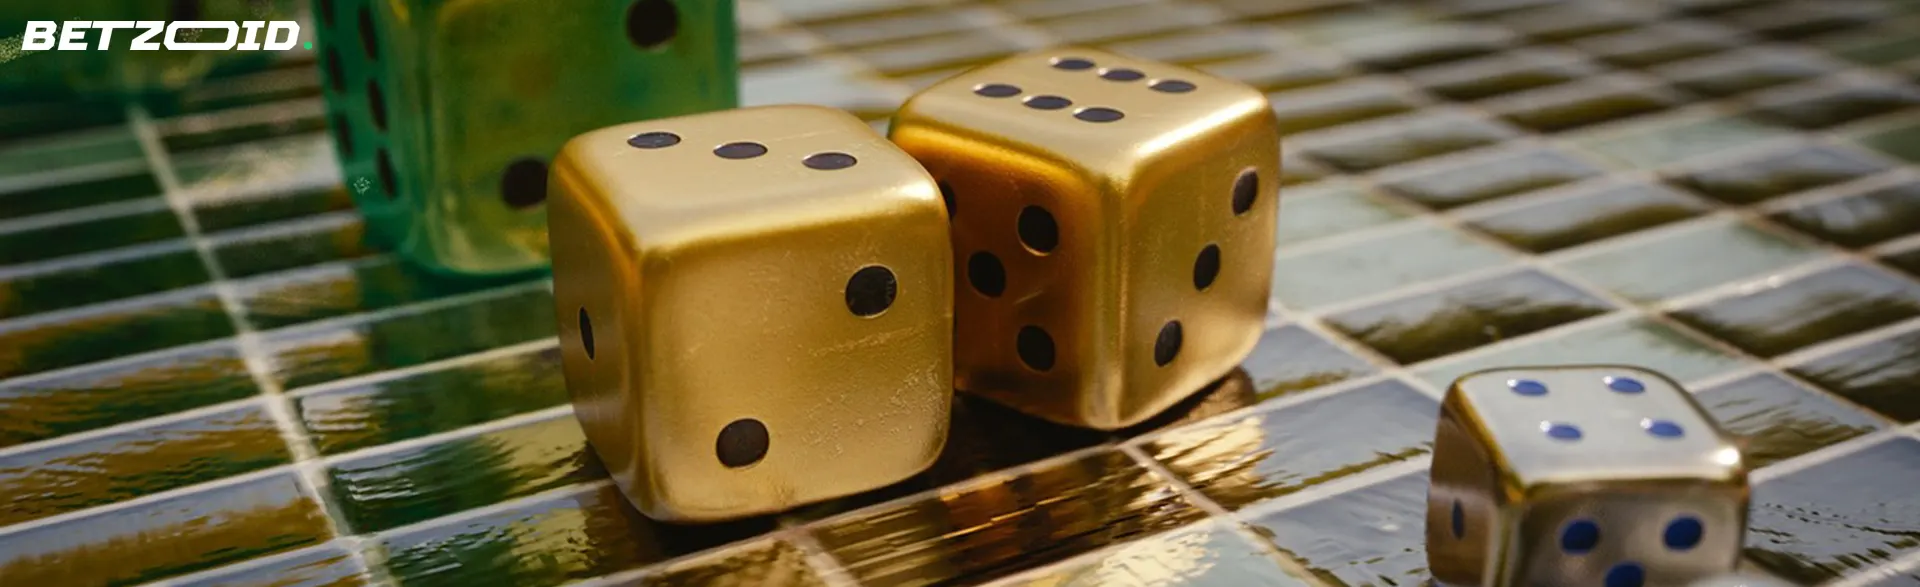 Golden dice on a tiled surface reflecting light, symbolizing chance and luck in gaming.